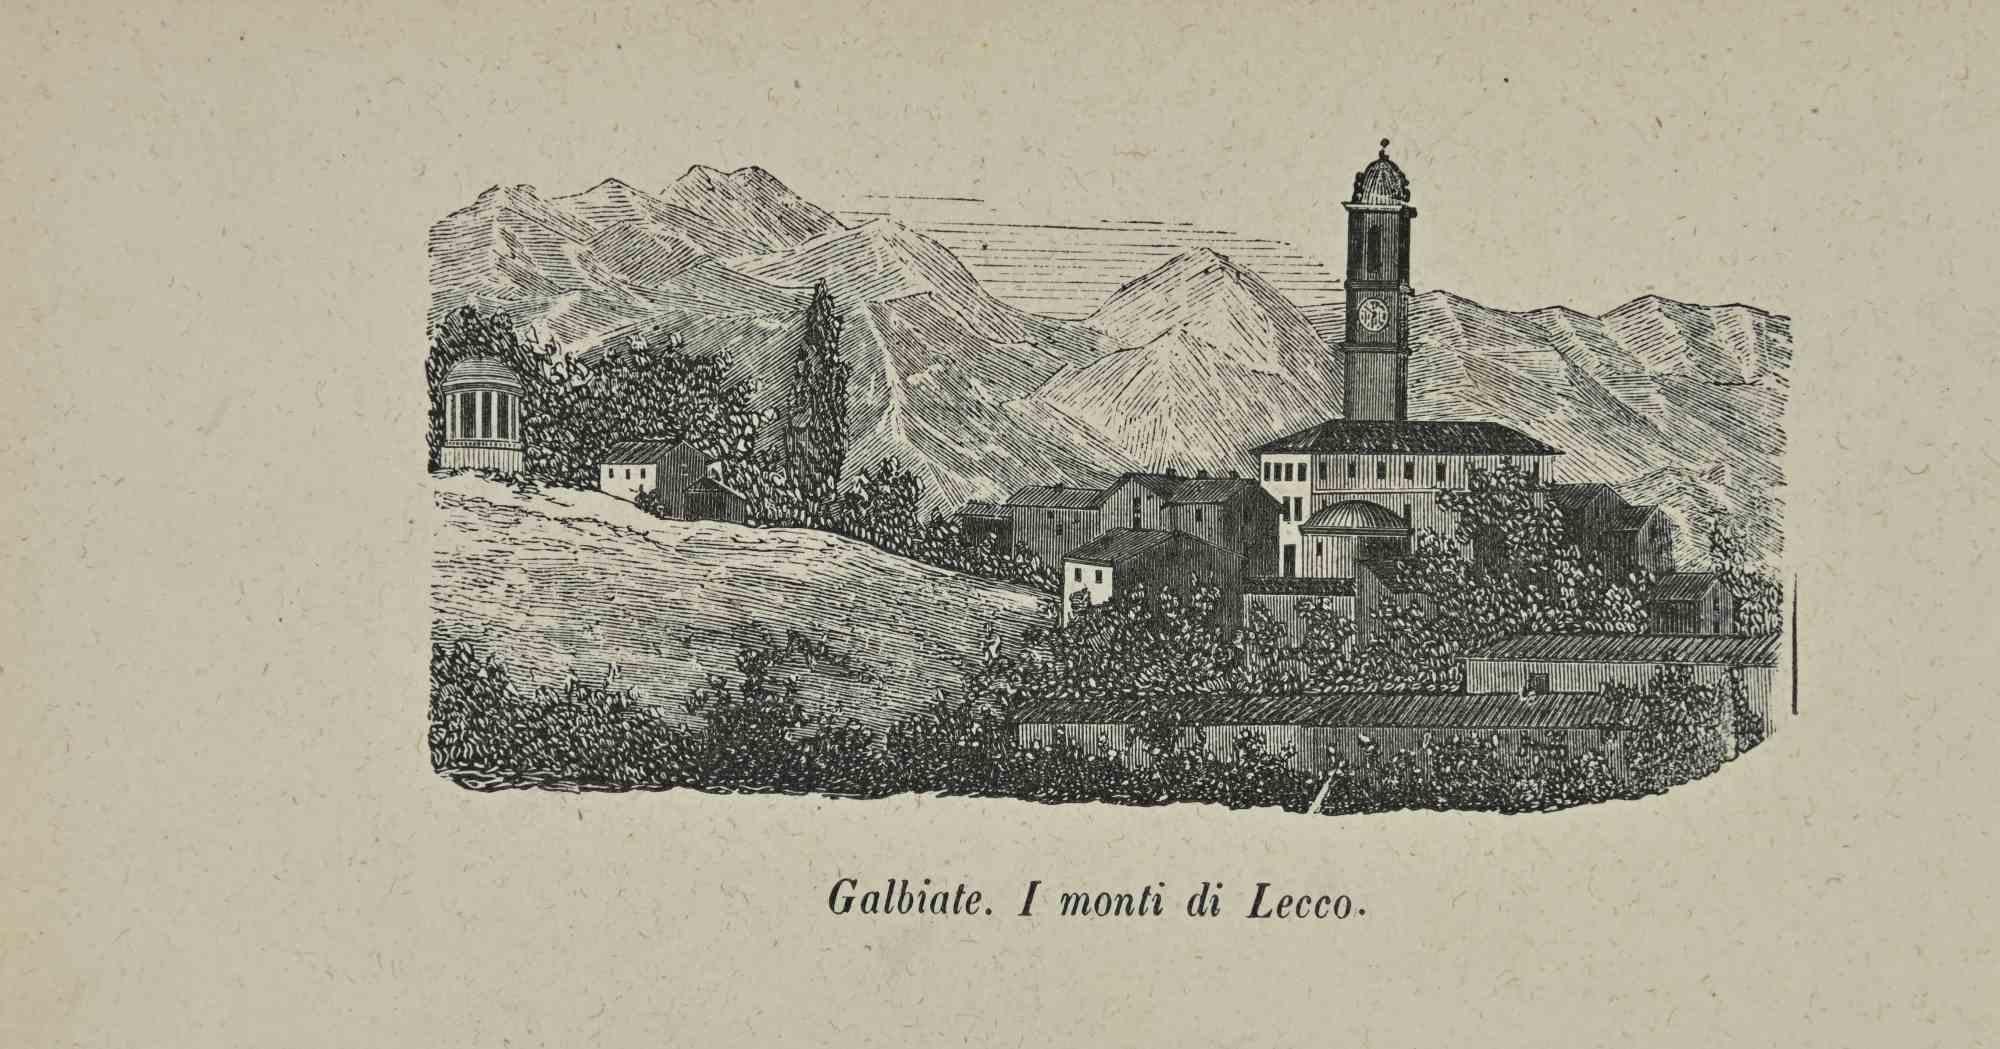 Various Artists Figurative Print - Uses and Customs - Galbiate. The Mountains of Lecco - Lithograph - 1862